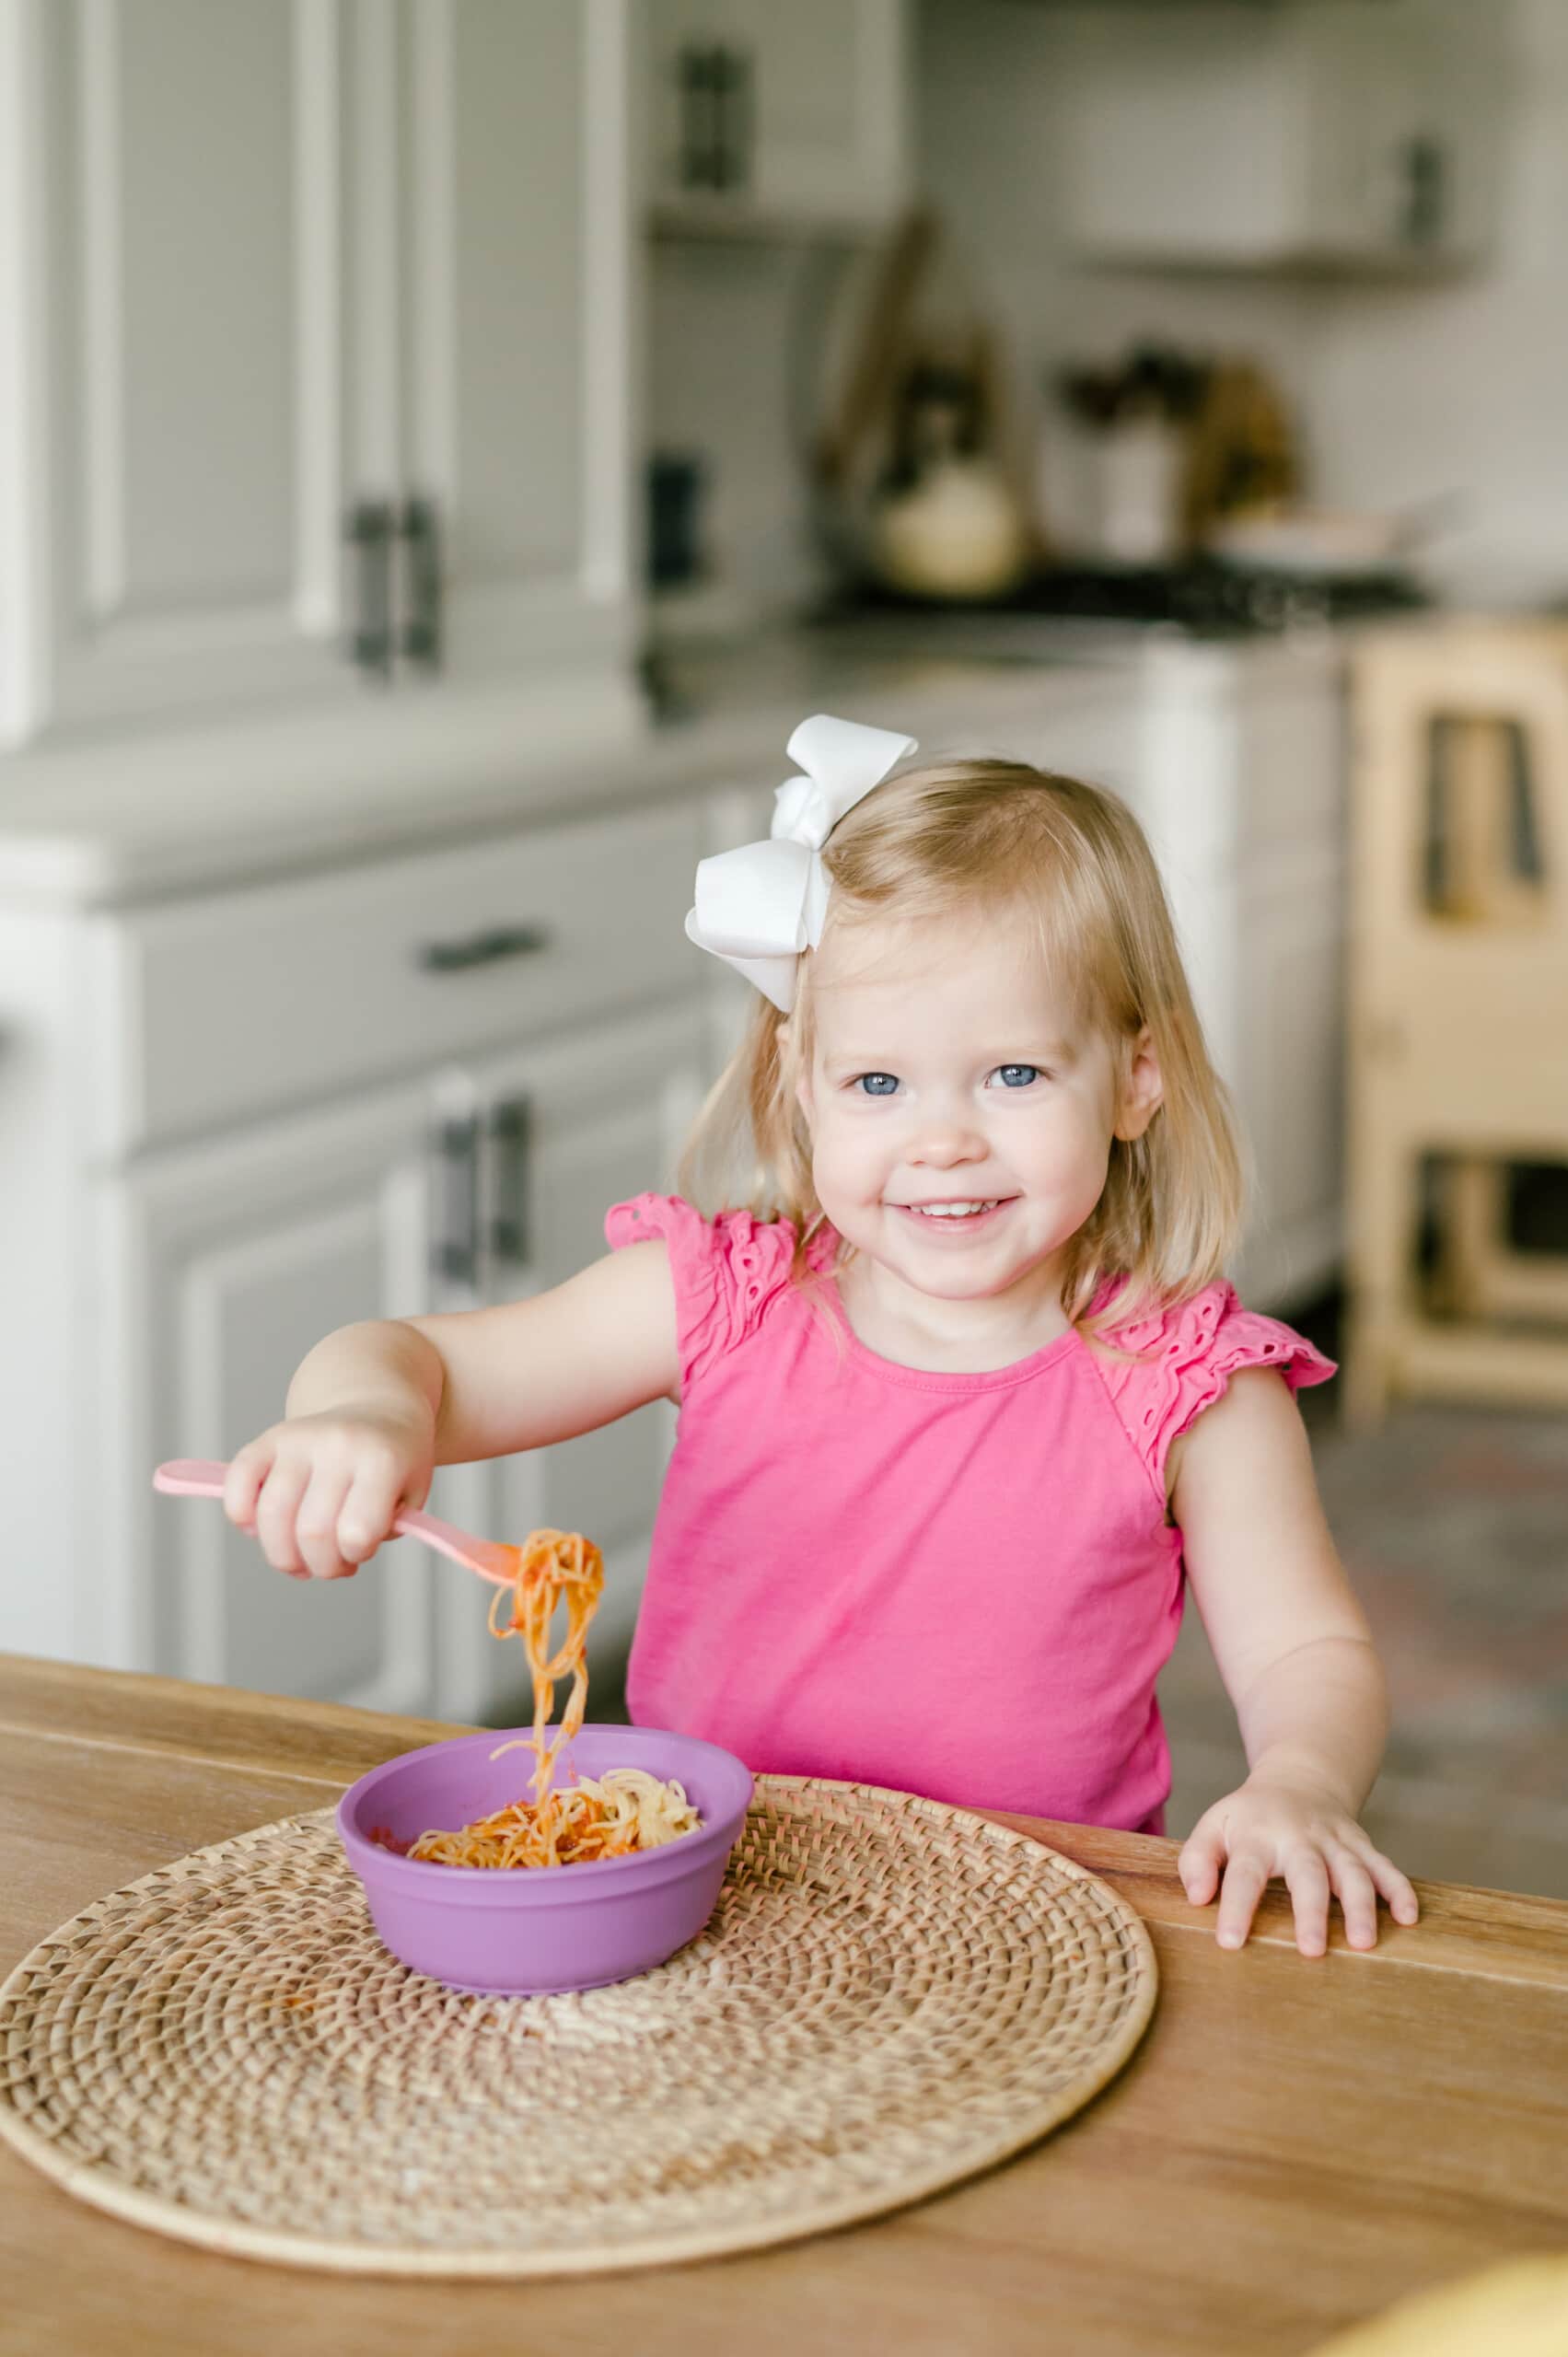 Young girl sitting at a table eating a bowl of spaghetti.